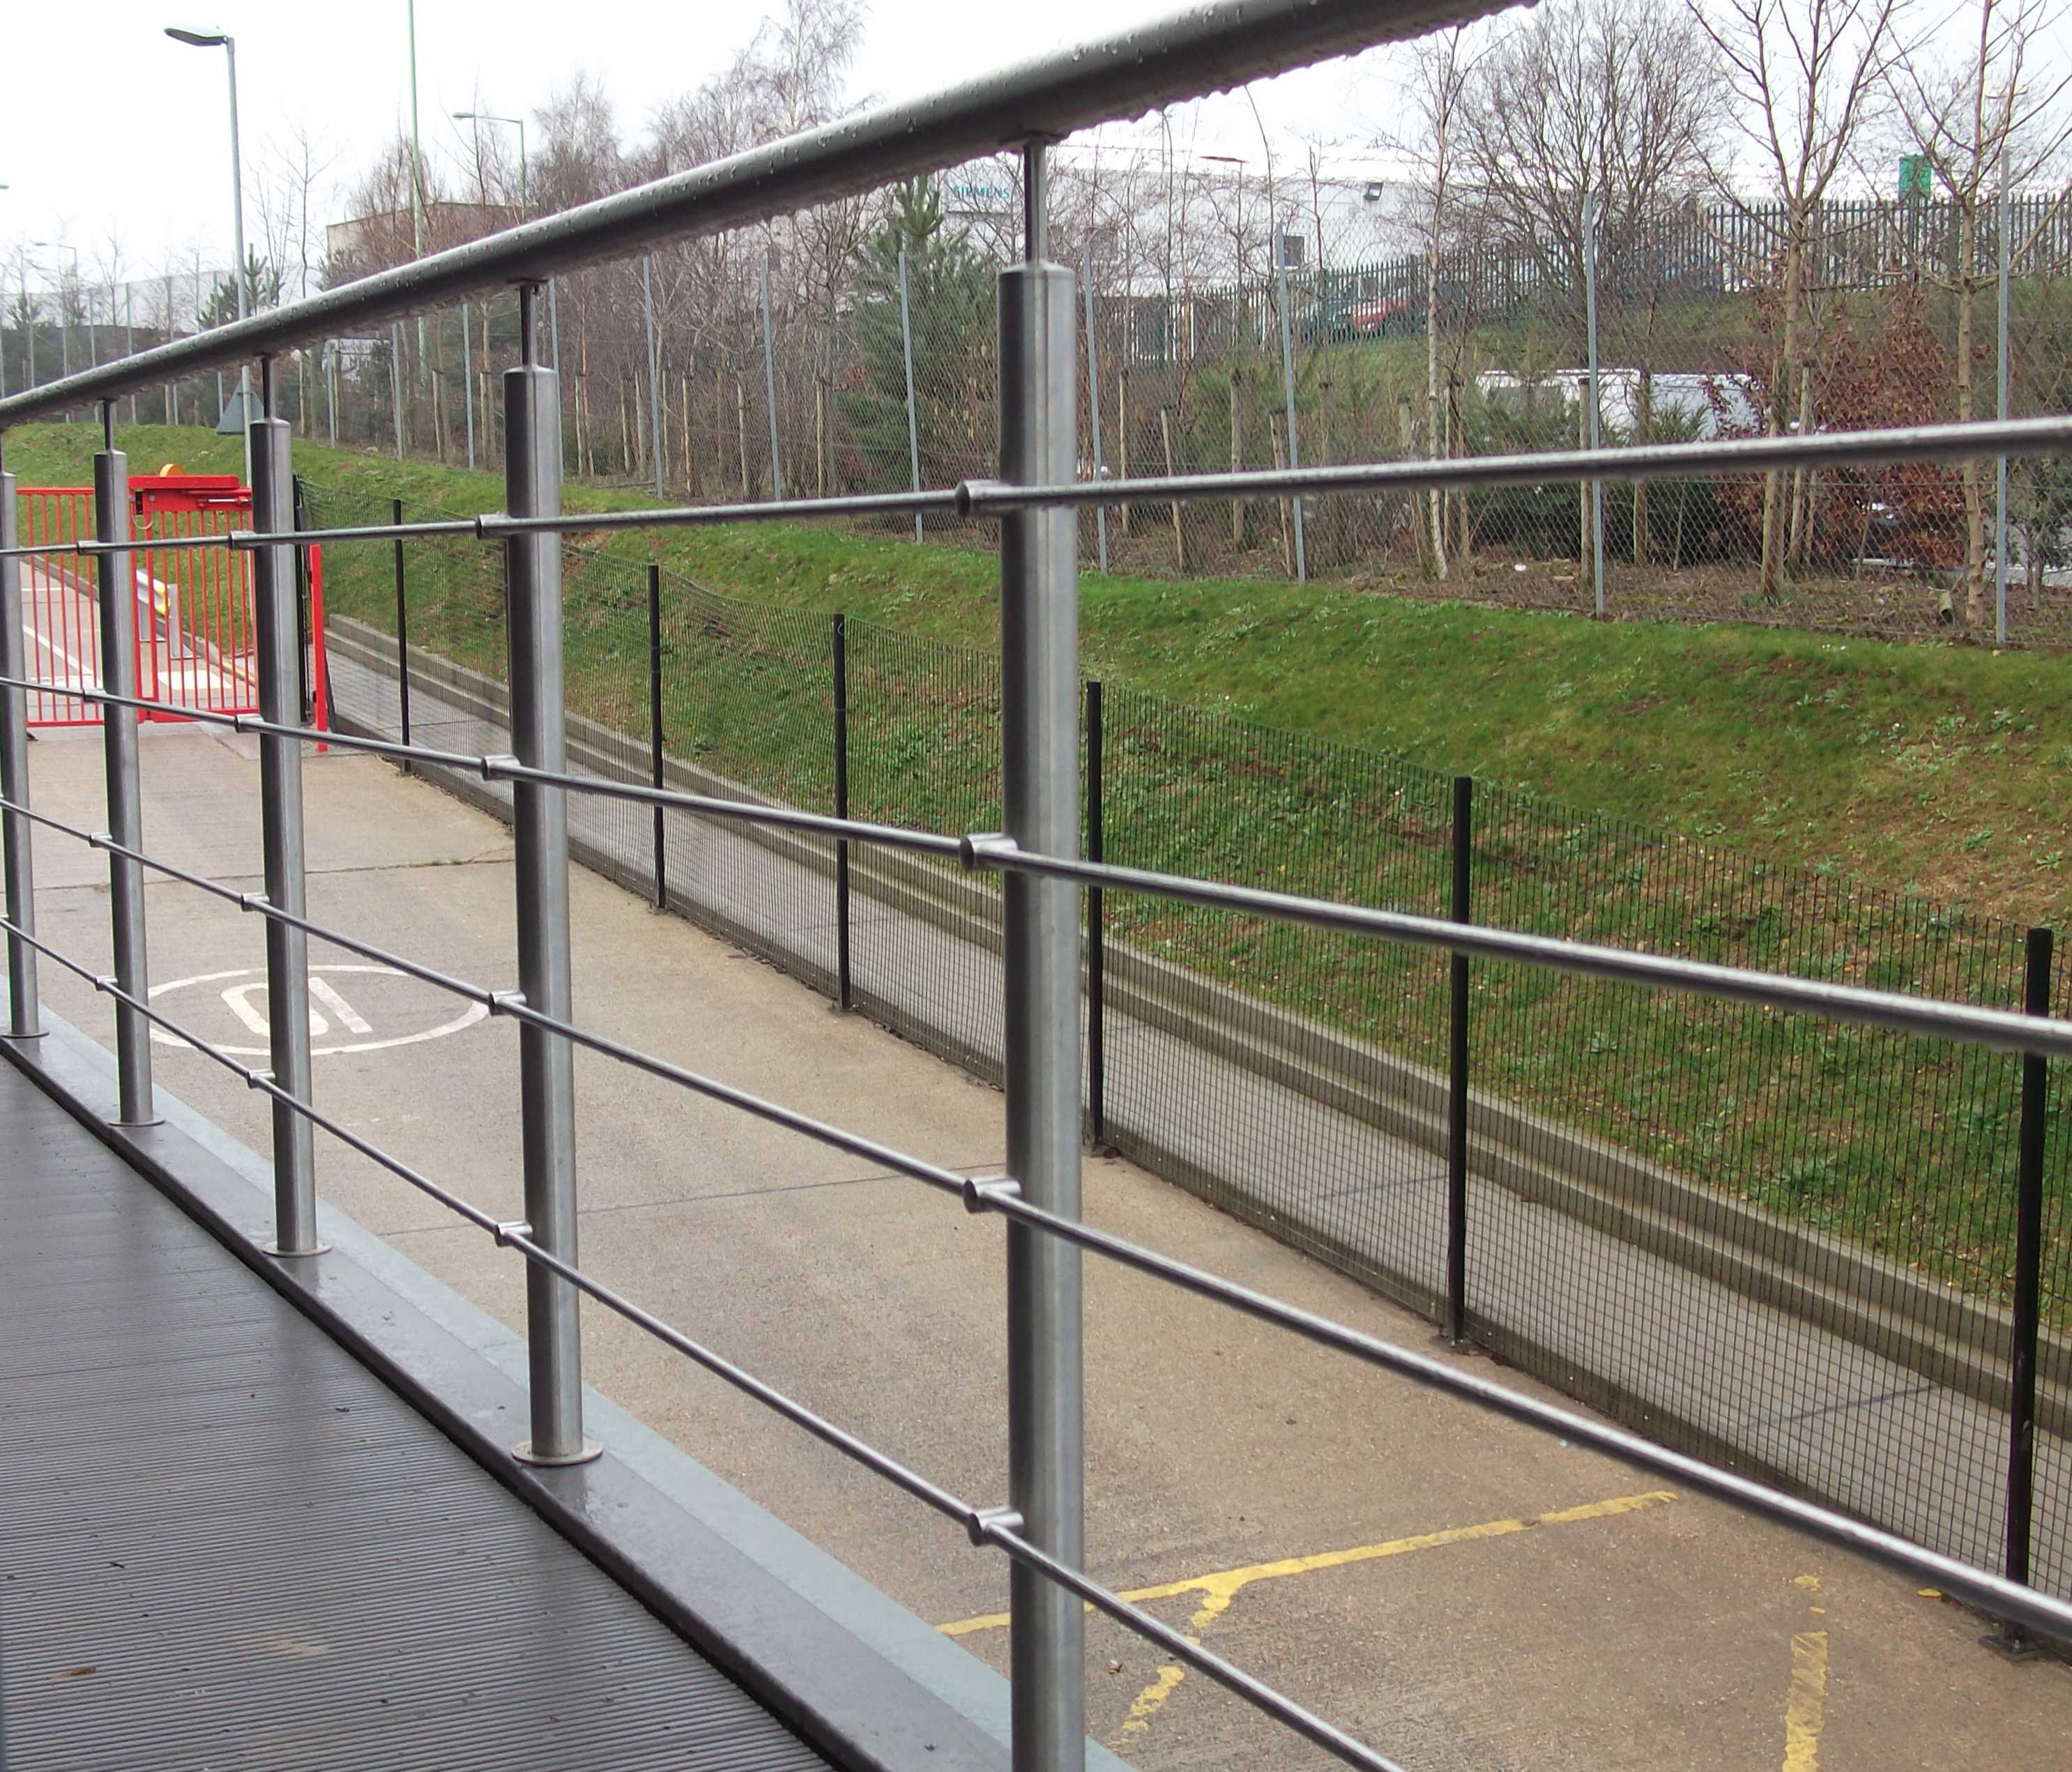 exterior stainless steel handrail and balustrade system